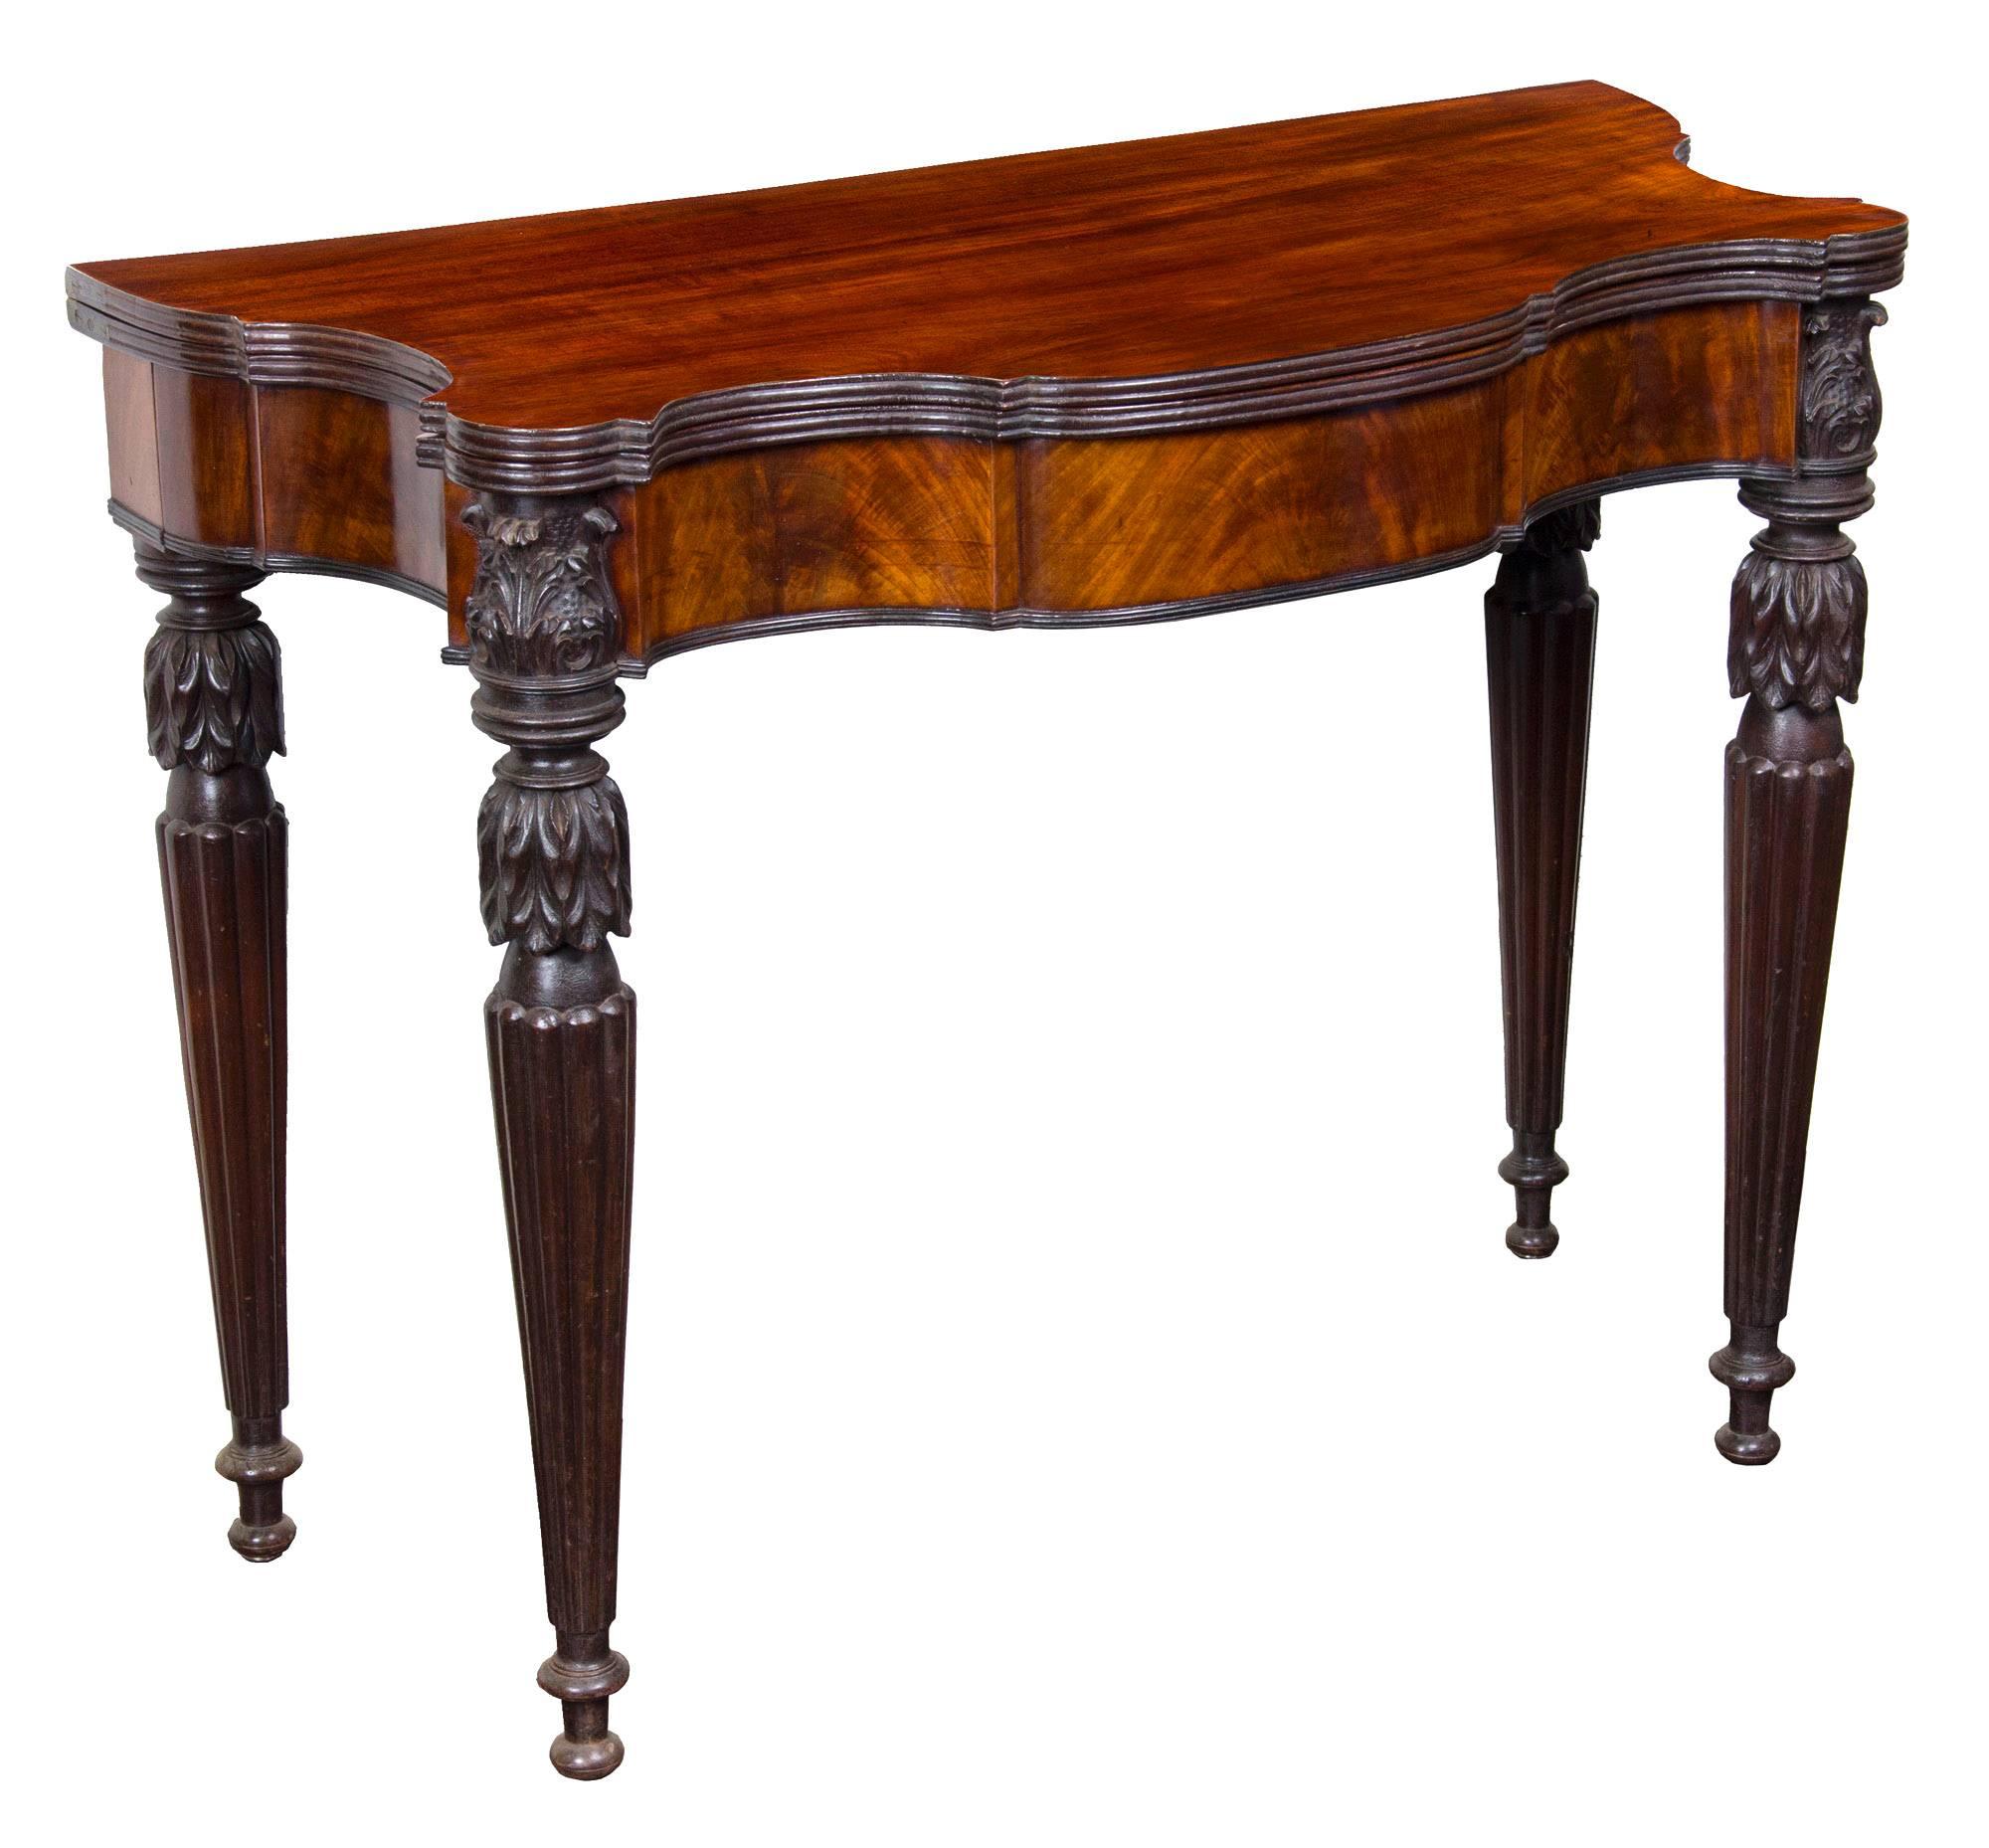 Outstanding Mahogany Sheraton Carved Card Table, Salem, 1810-1815 For Sale